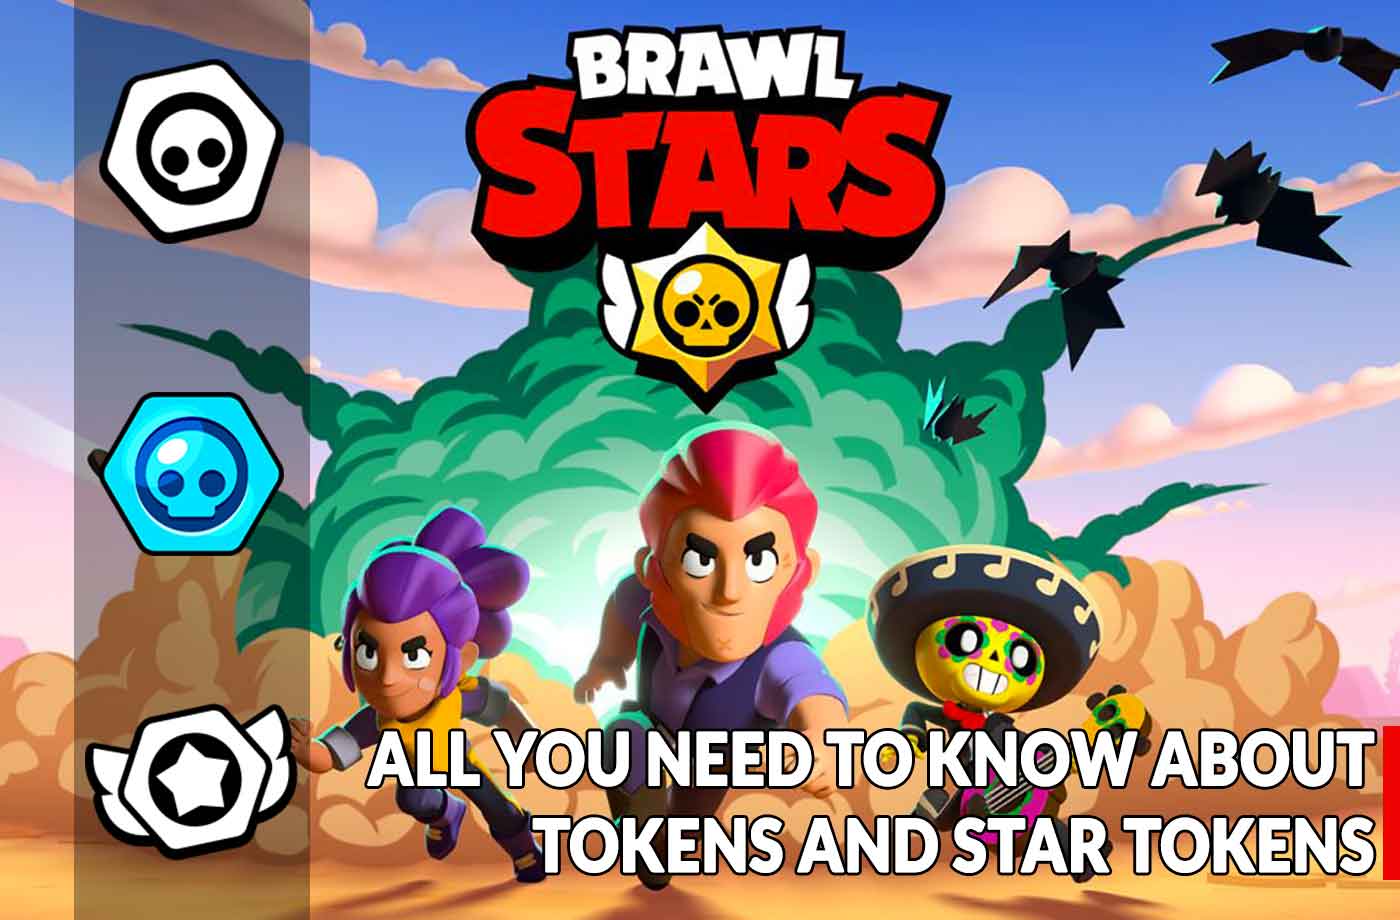 Guide Brawl Stars How To Quickly Gain Tokens And Star Tokens Kill The Game - actualité brawl stars